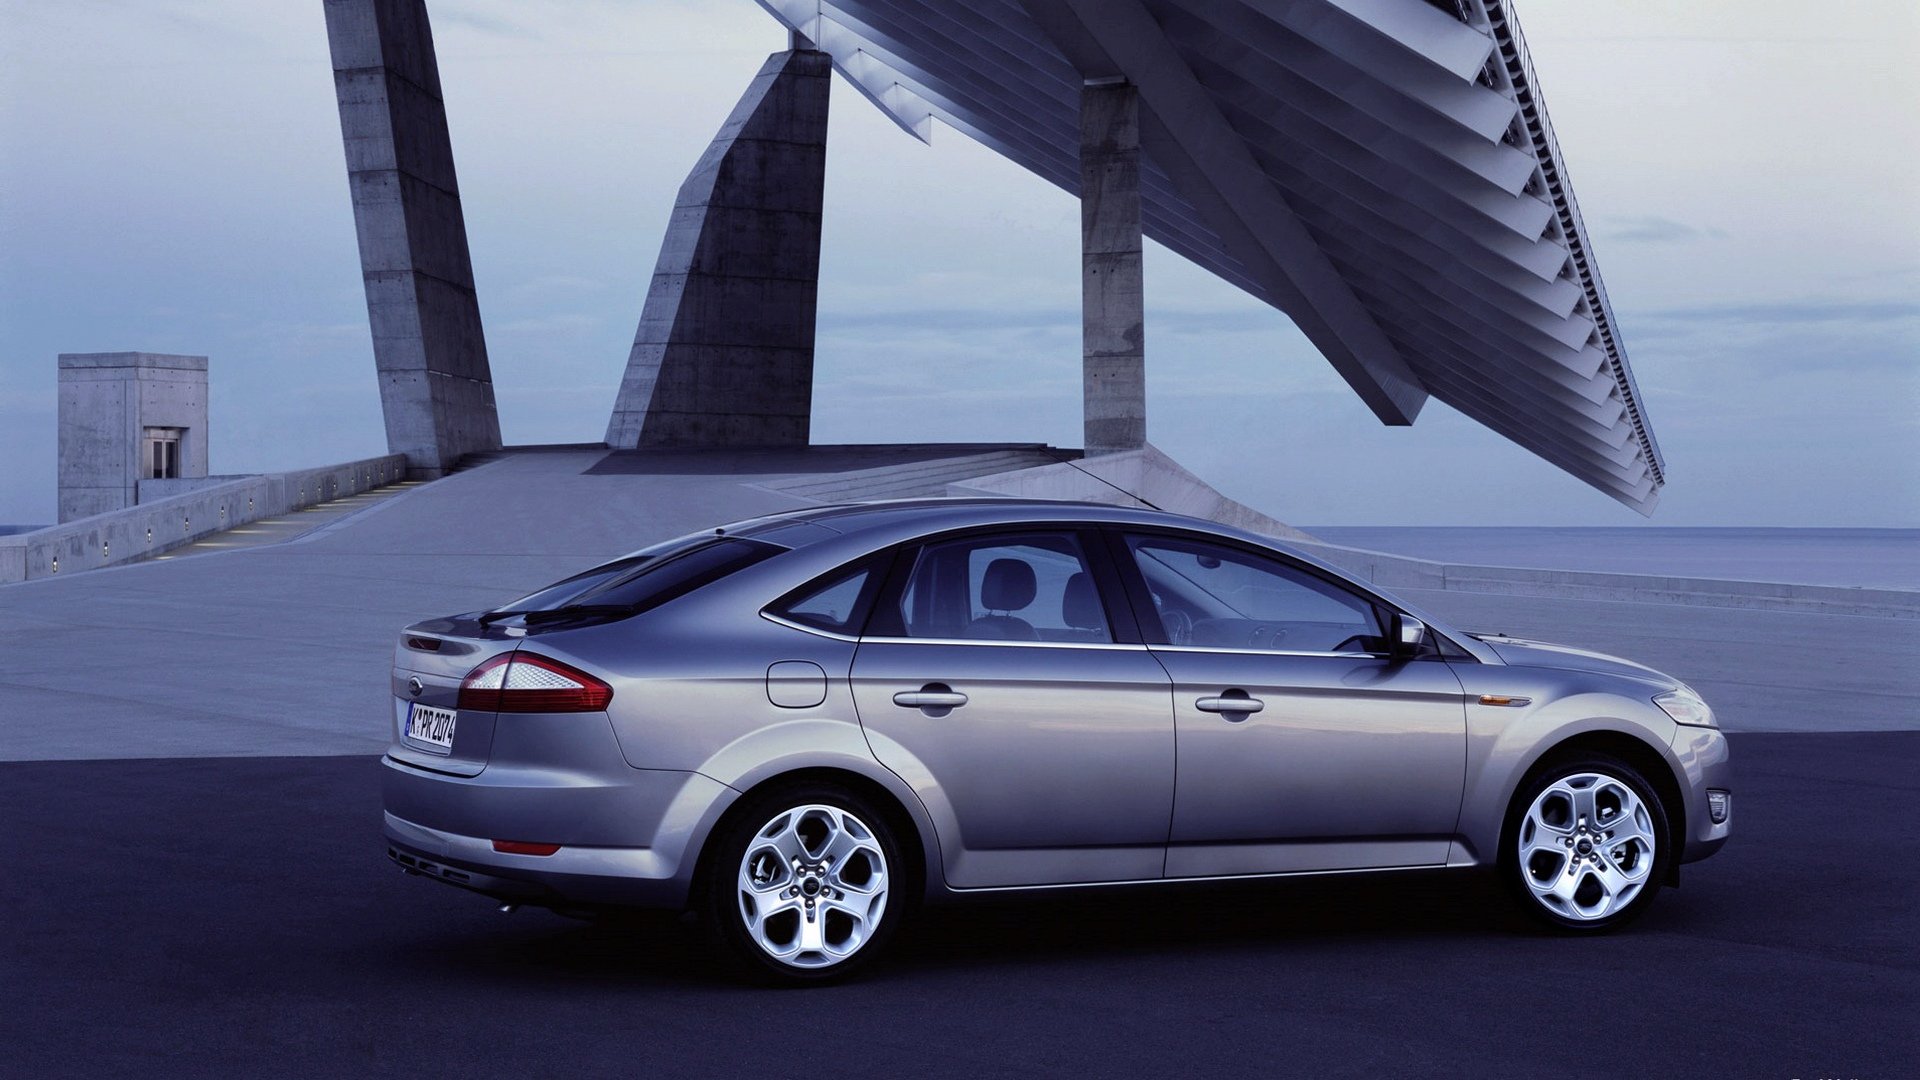 ford, Mondeo, 2007 Wallpaper